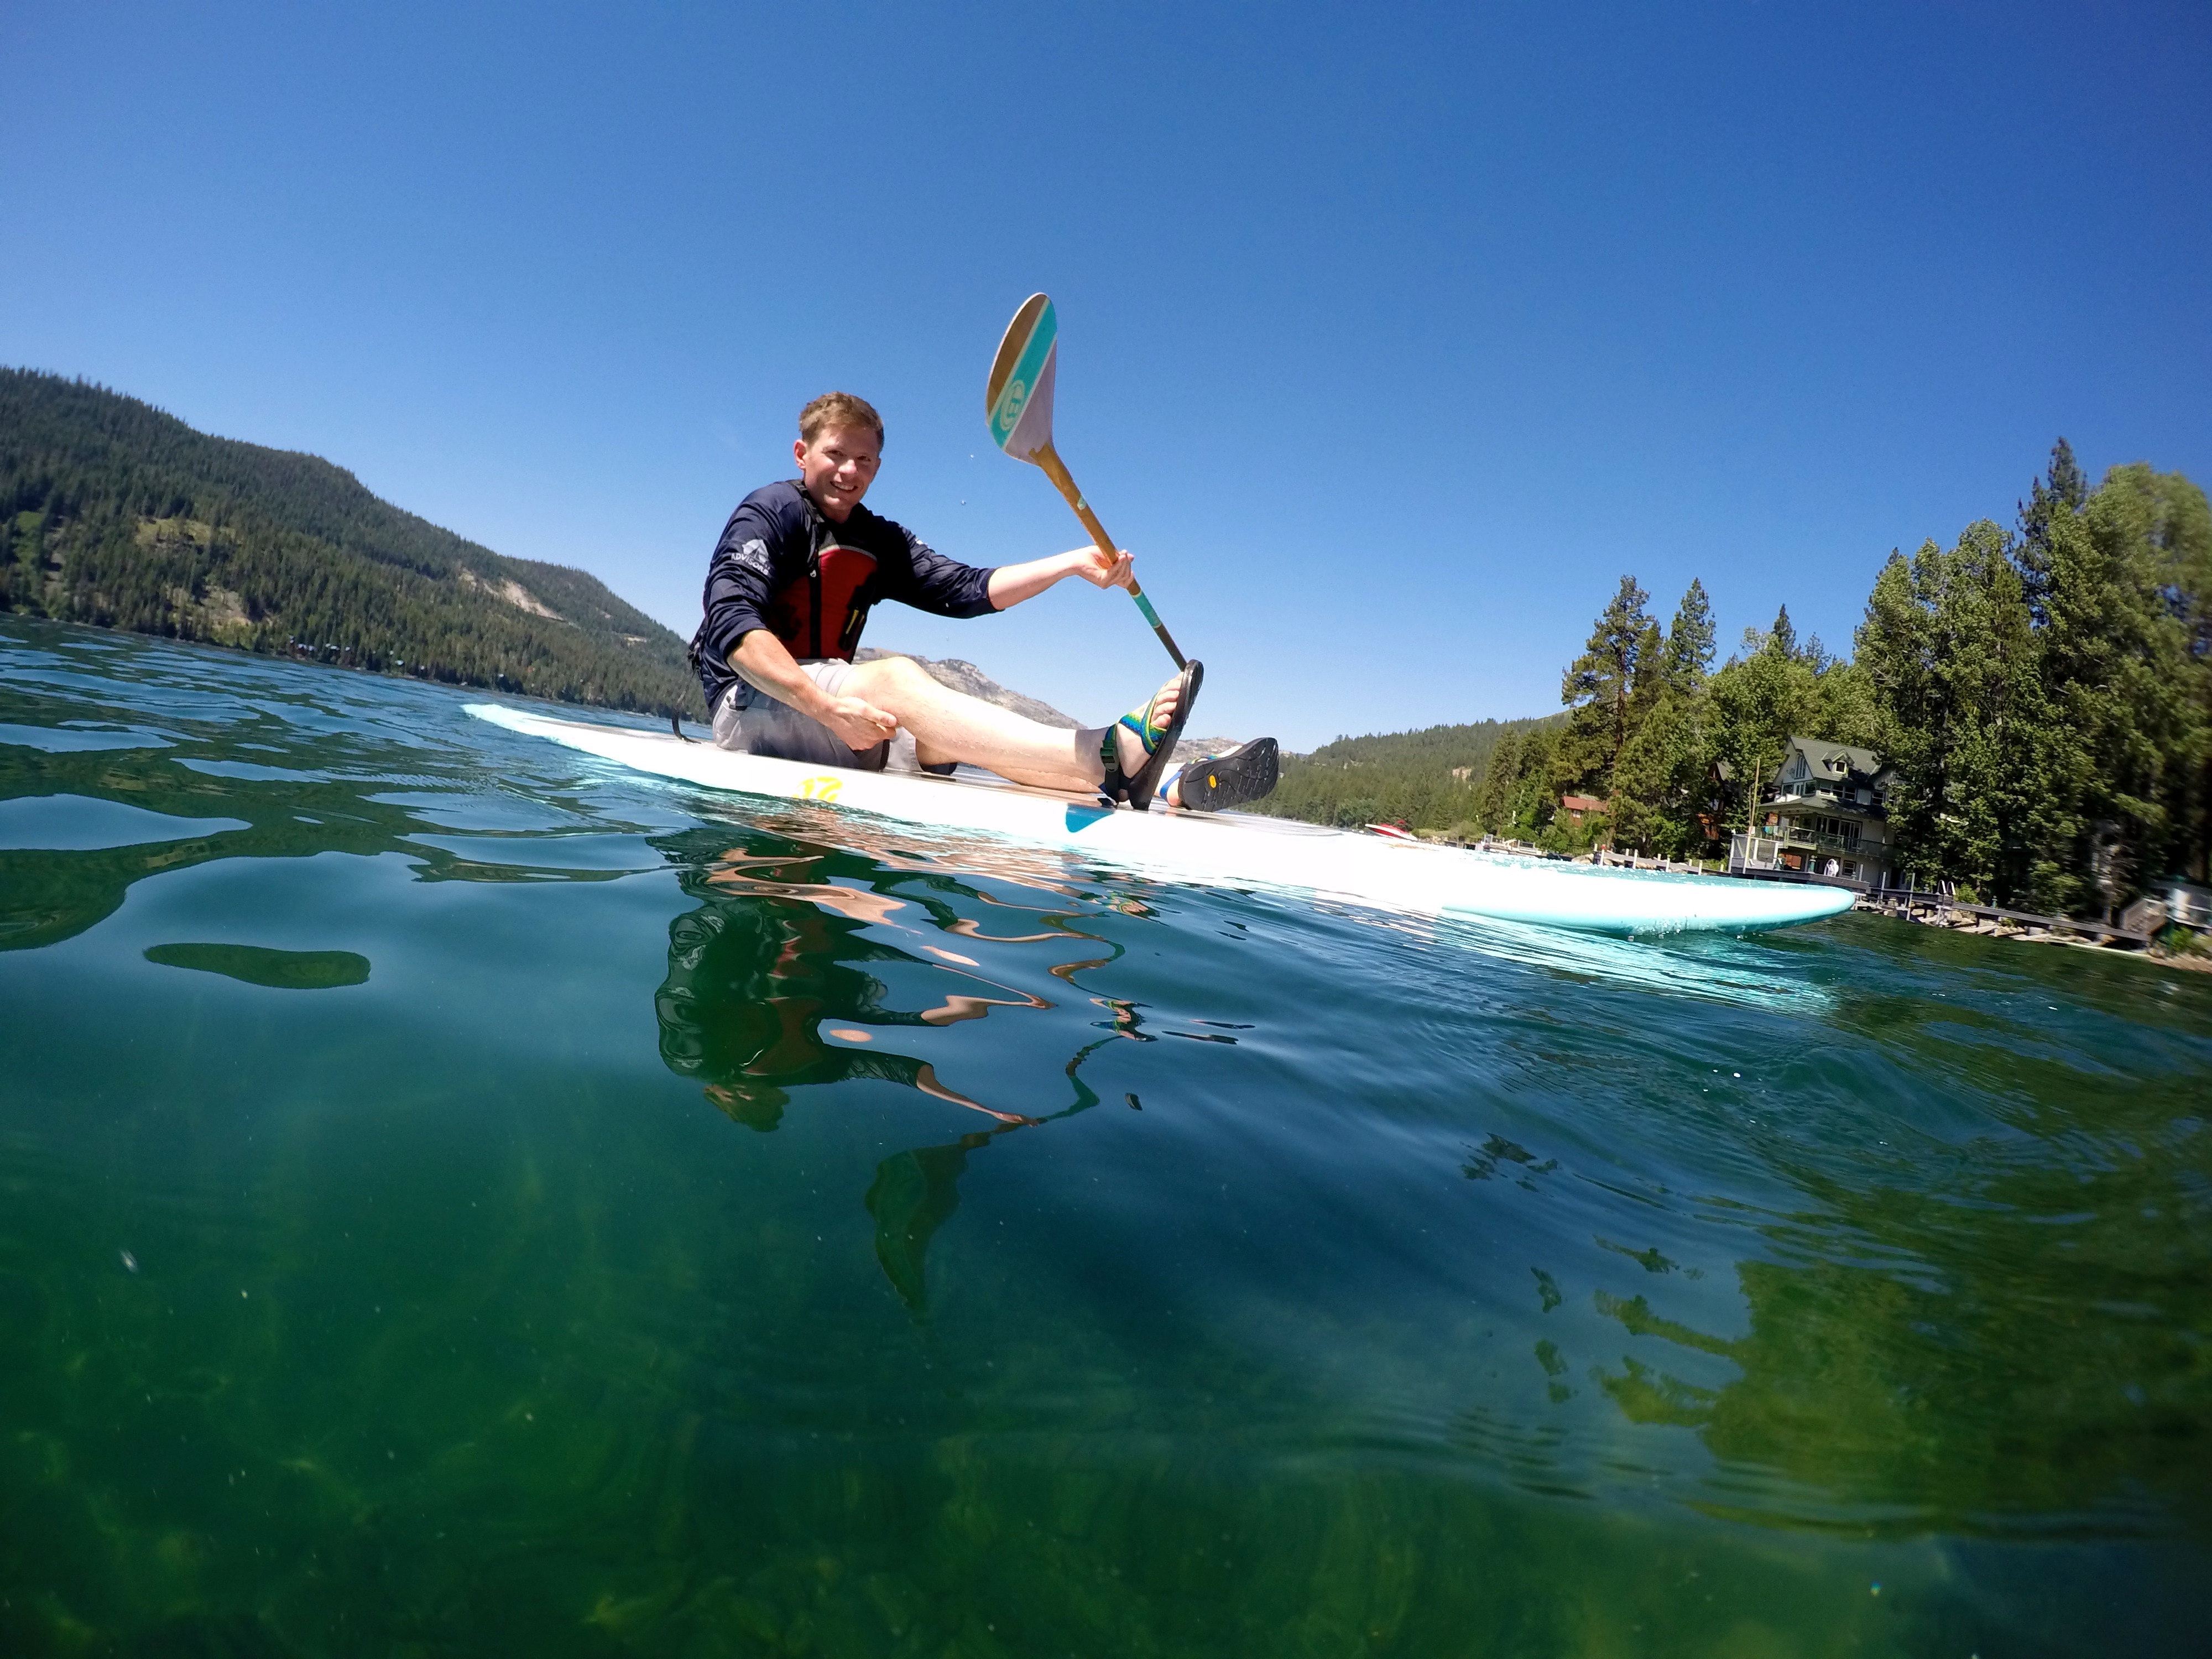 Paddle board yoga on Donner Lake w/ the High Fives Foundation | Photo Courtesy High Fives